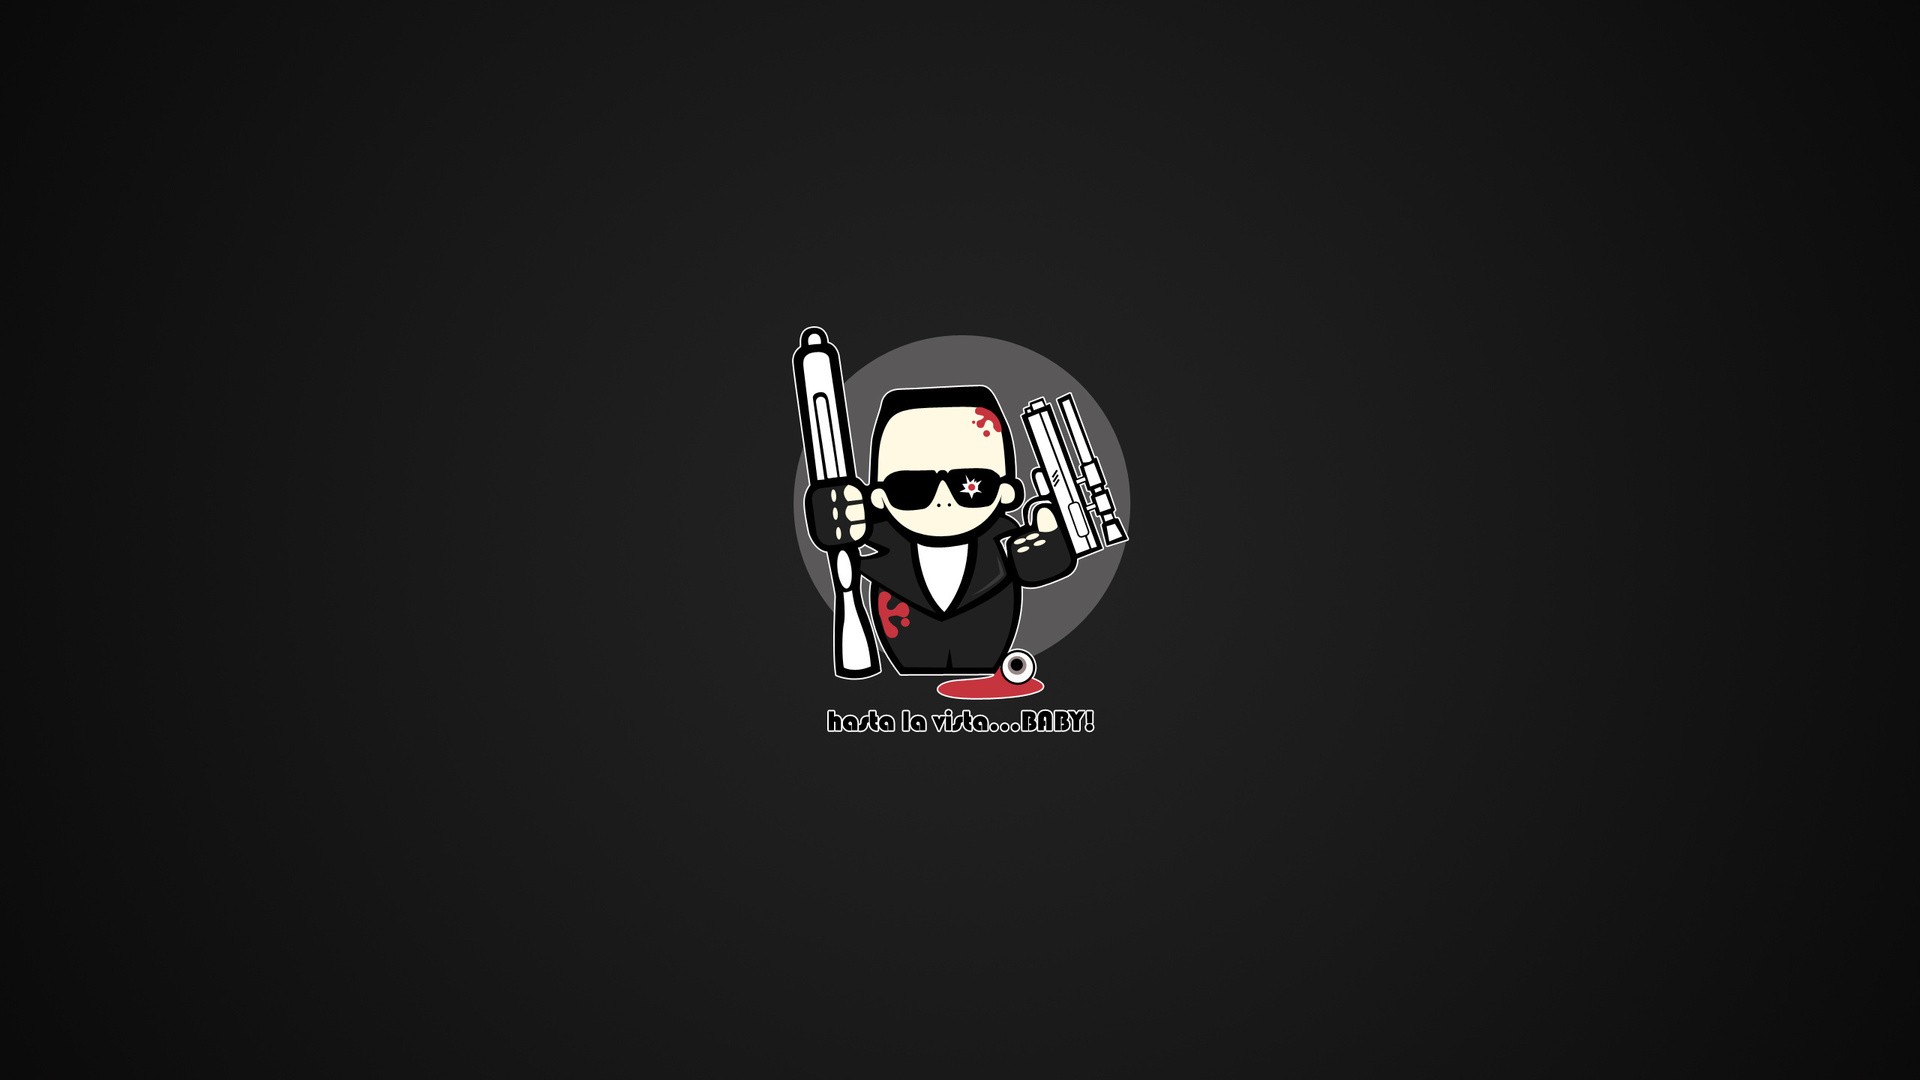 General 1920x1080 Terminator text minimalism simple background black background weapon blood movies cyborg science fiction